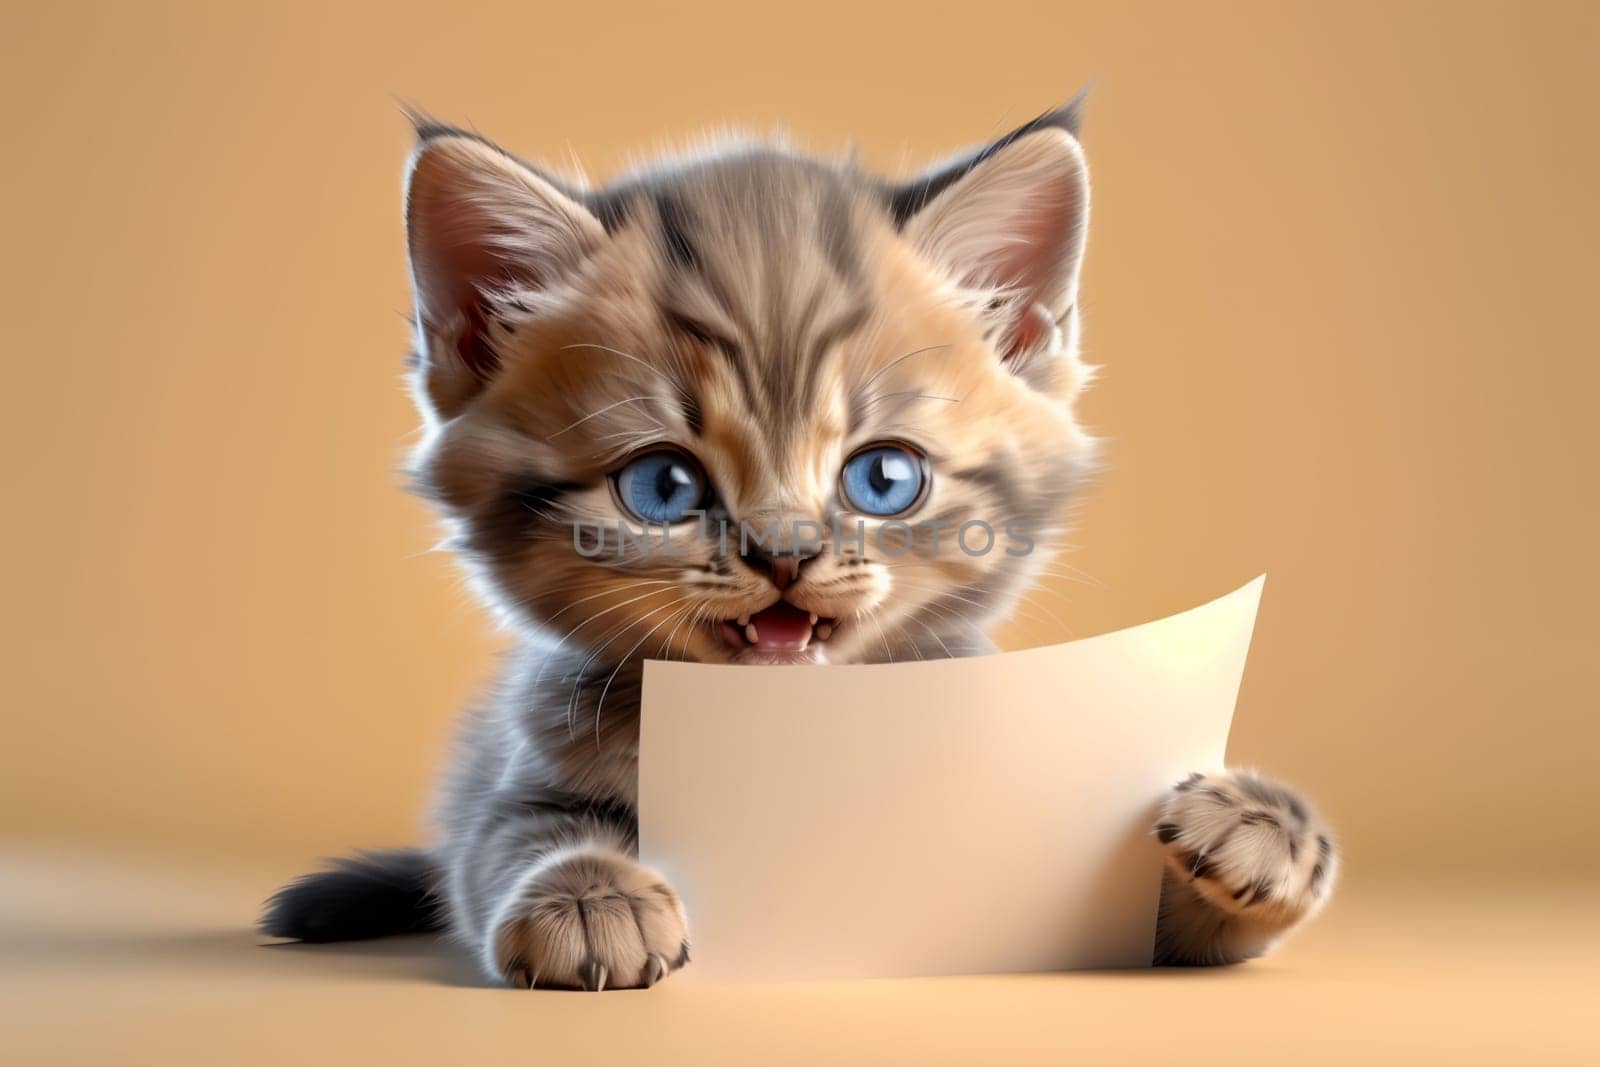 cute kitten with a pure form for text, isolated on a light brown background .